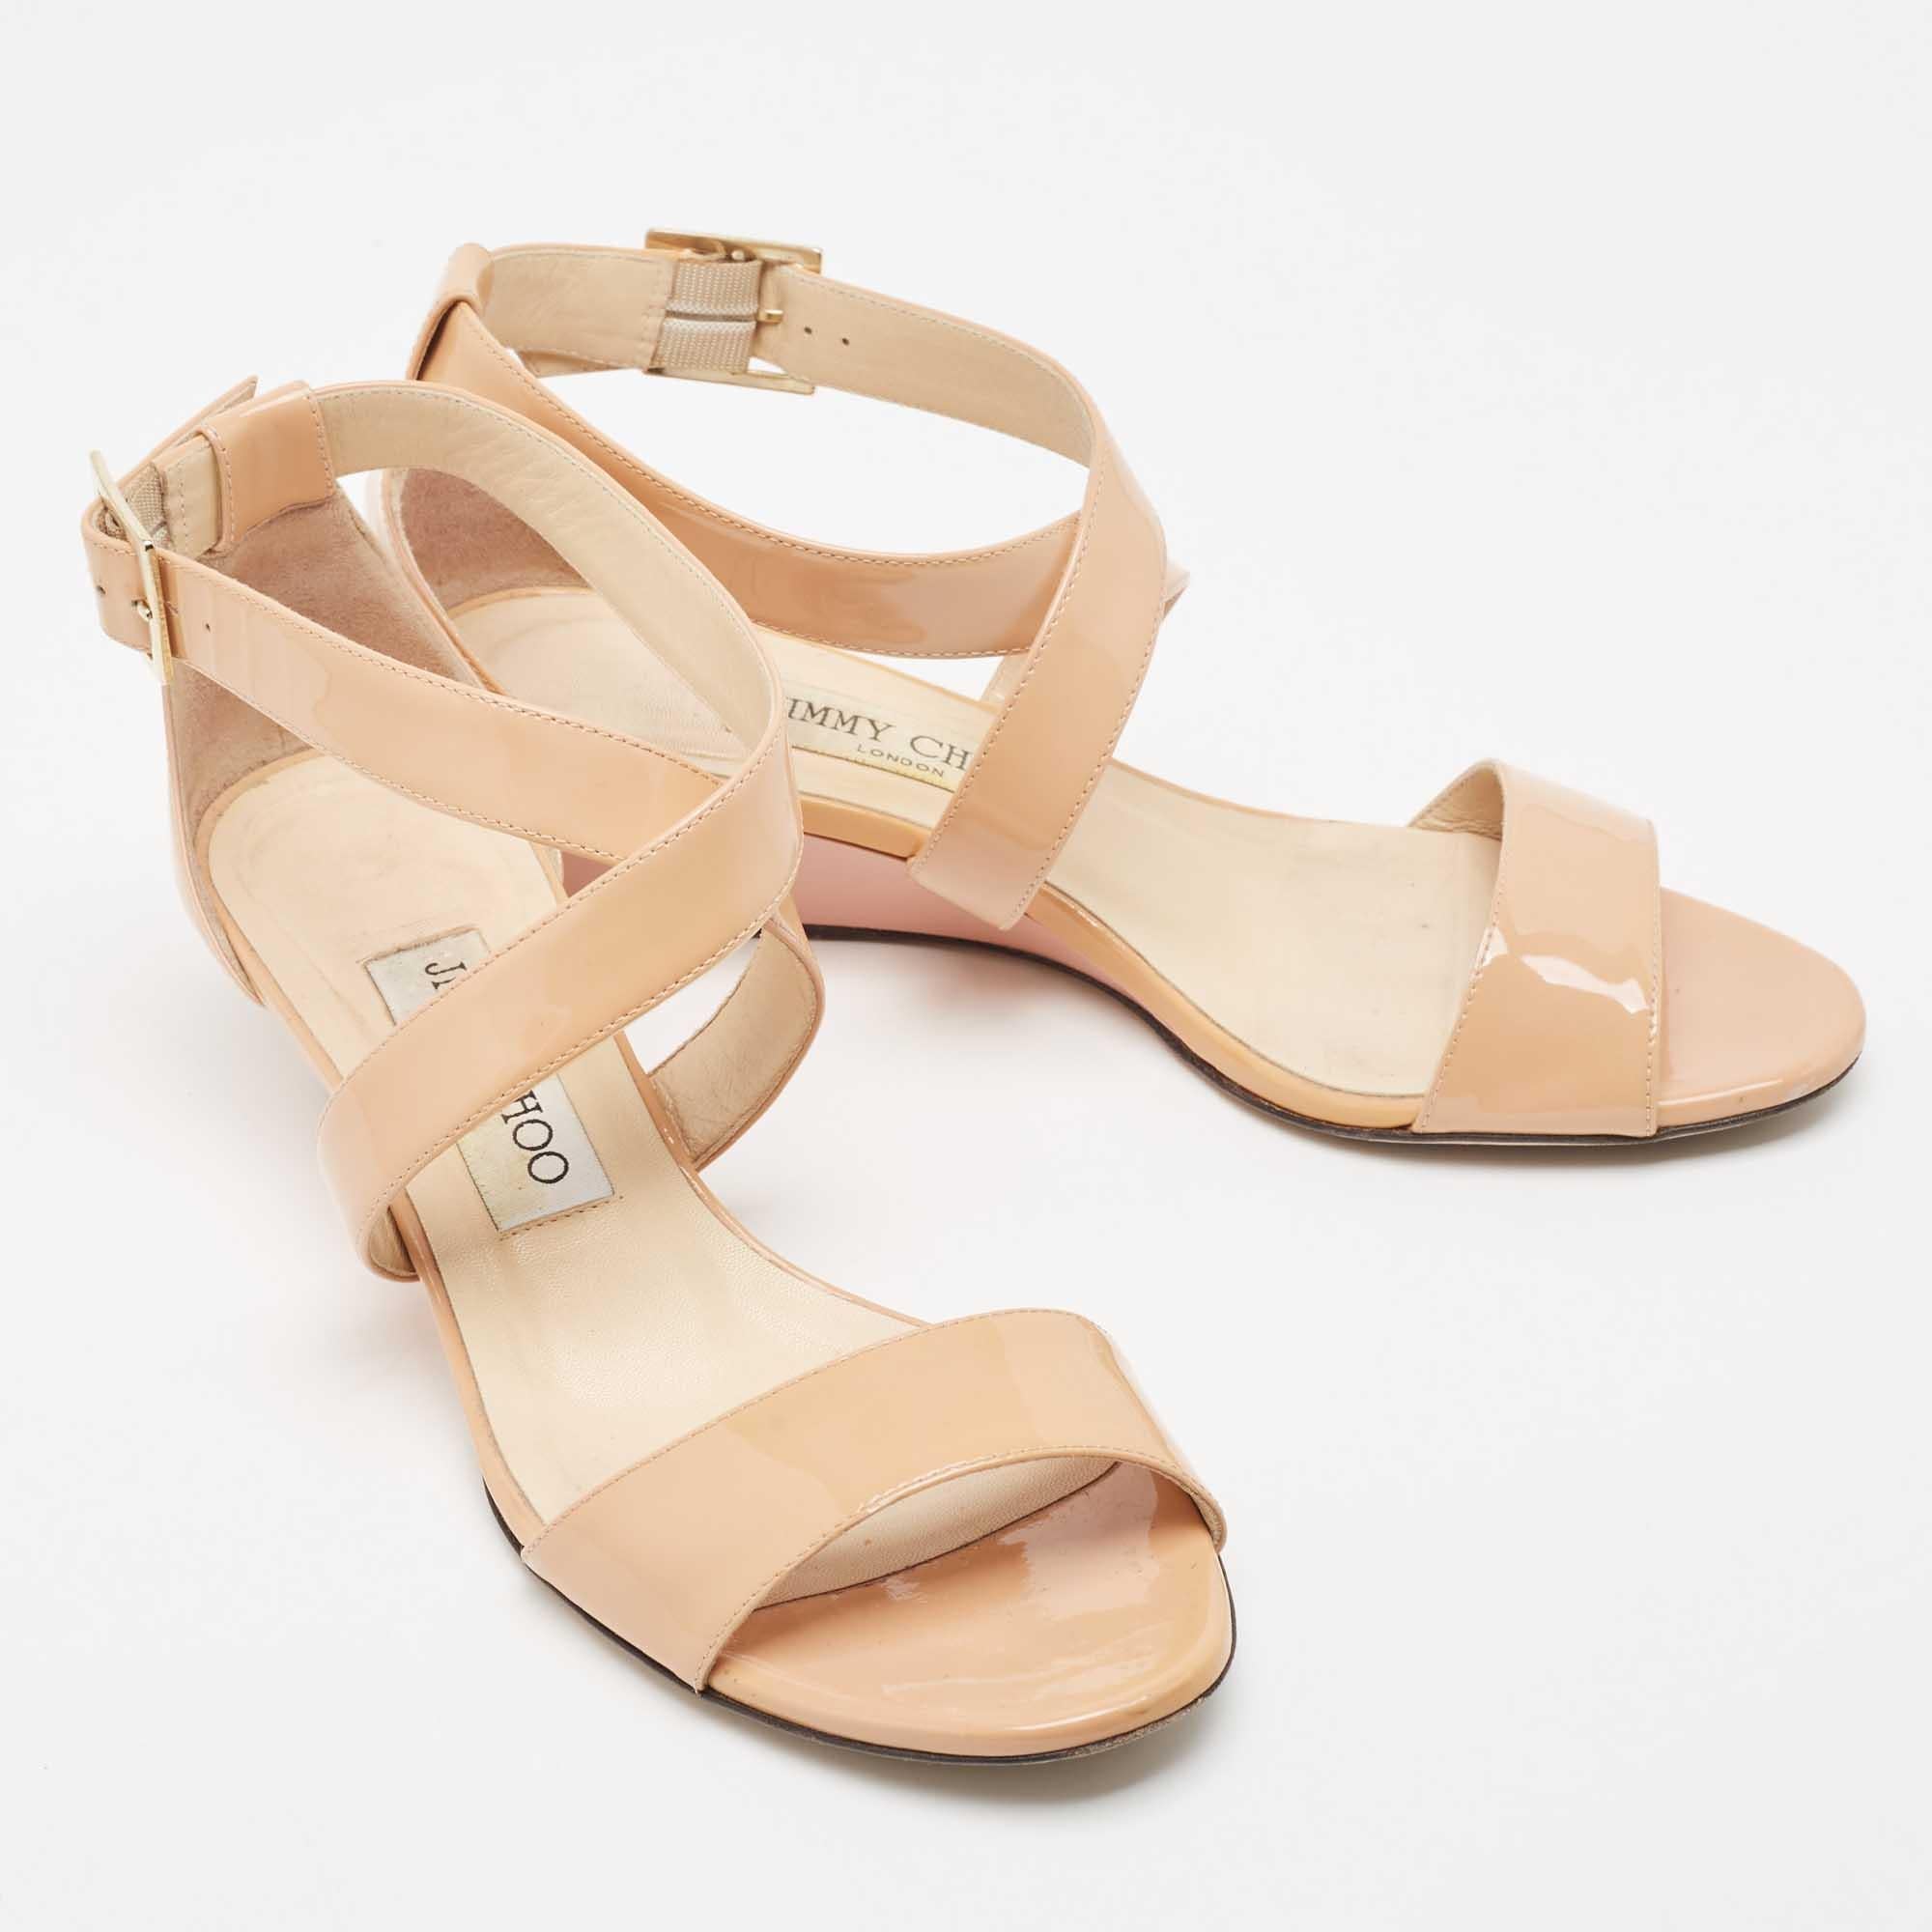 Jimmy Choo Beige Patent Leather Chiara Wedge Sandals Size 37 In Good Condition For Sale In Dubai, Al Qouz 2